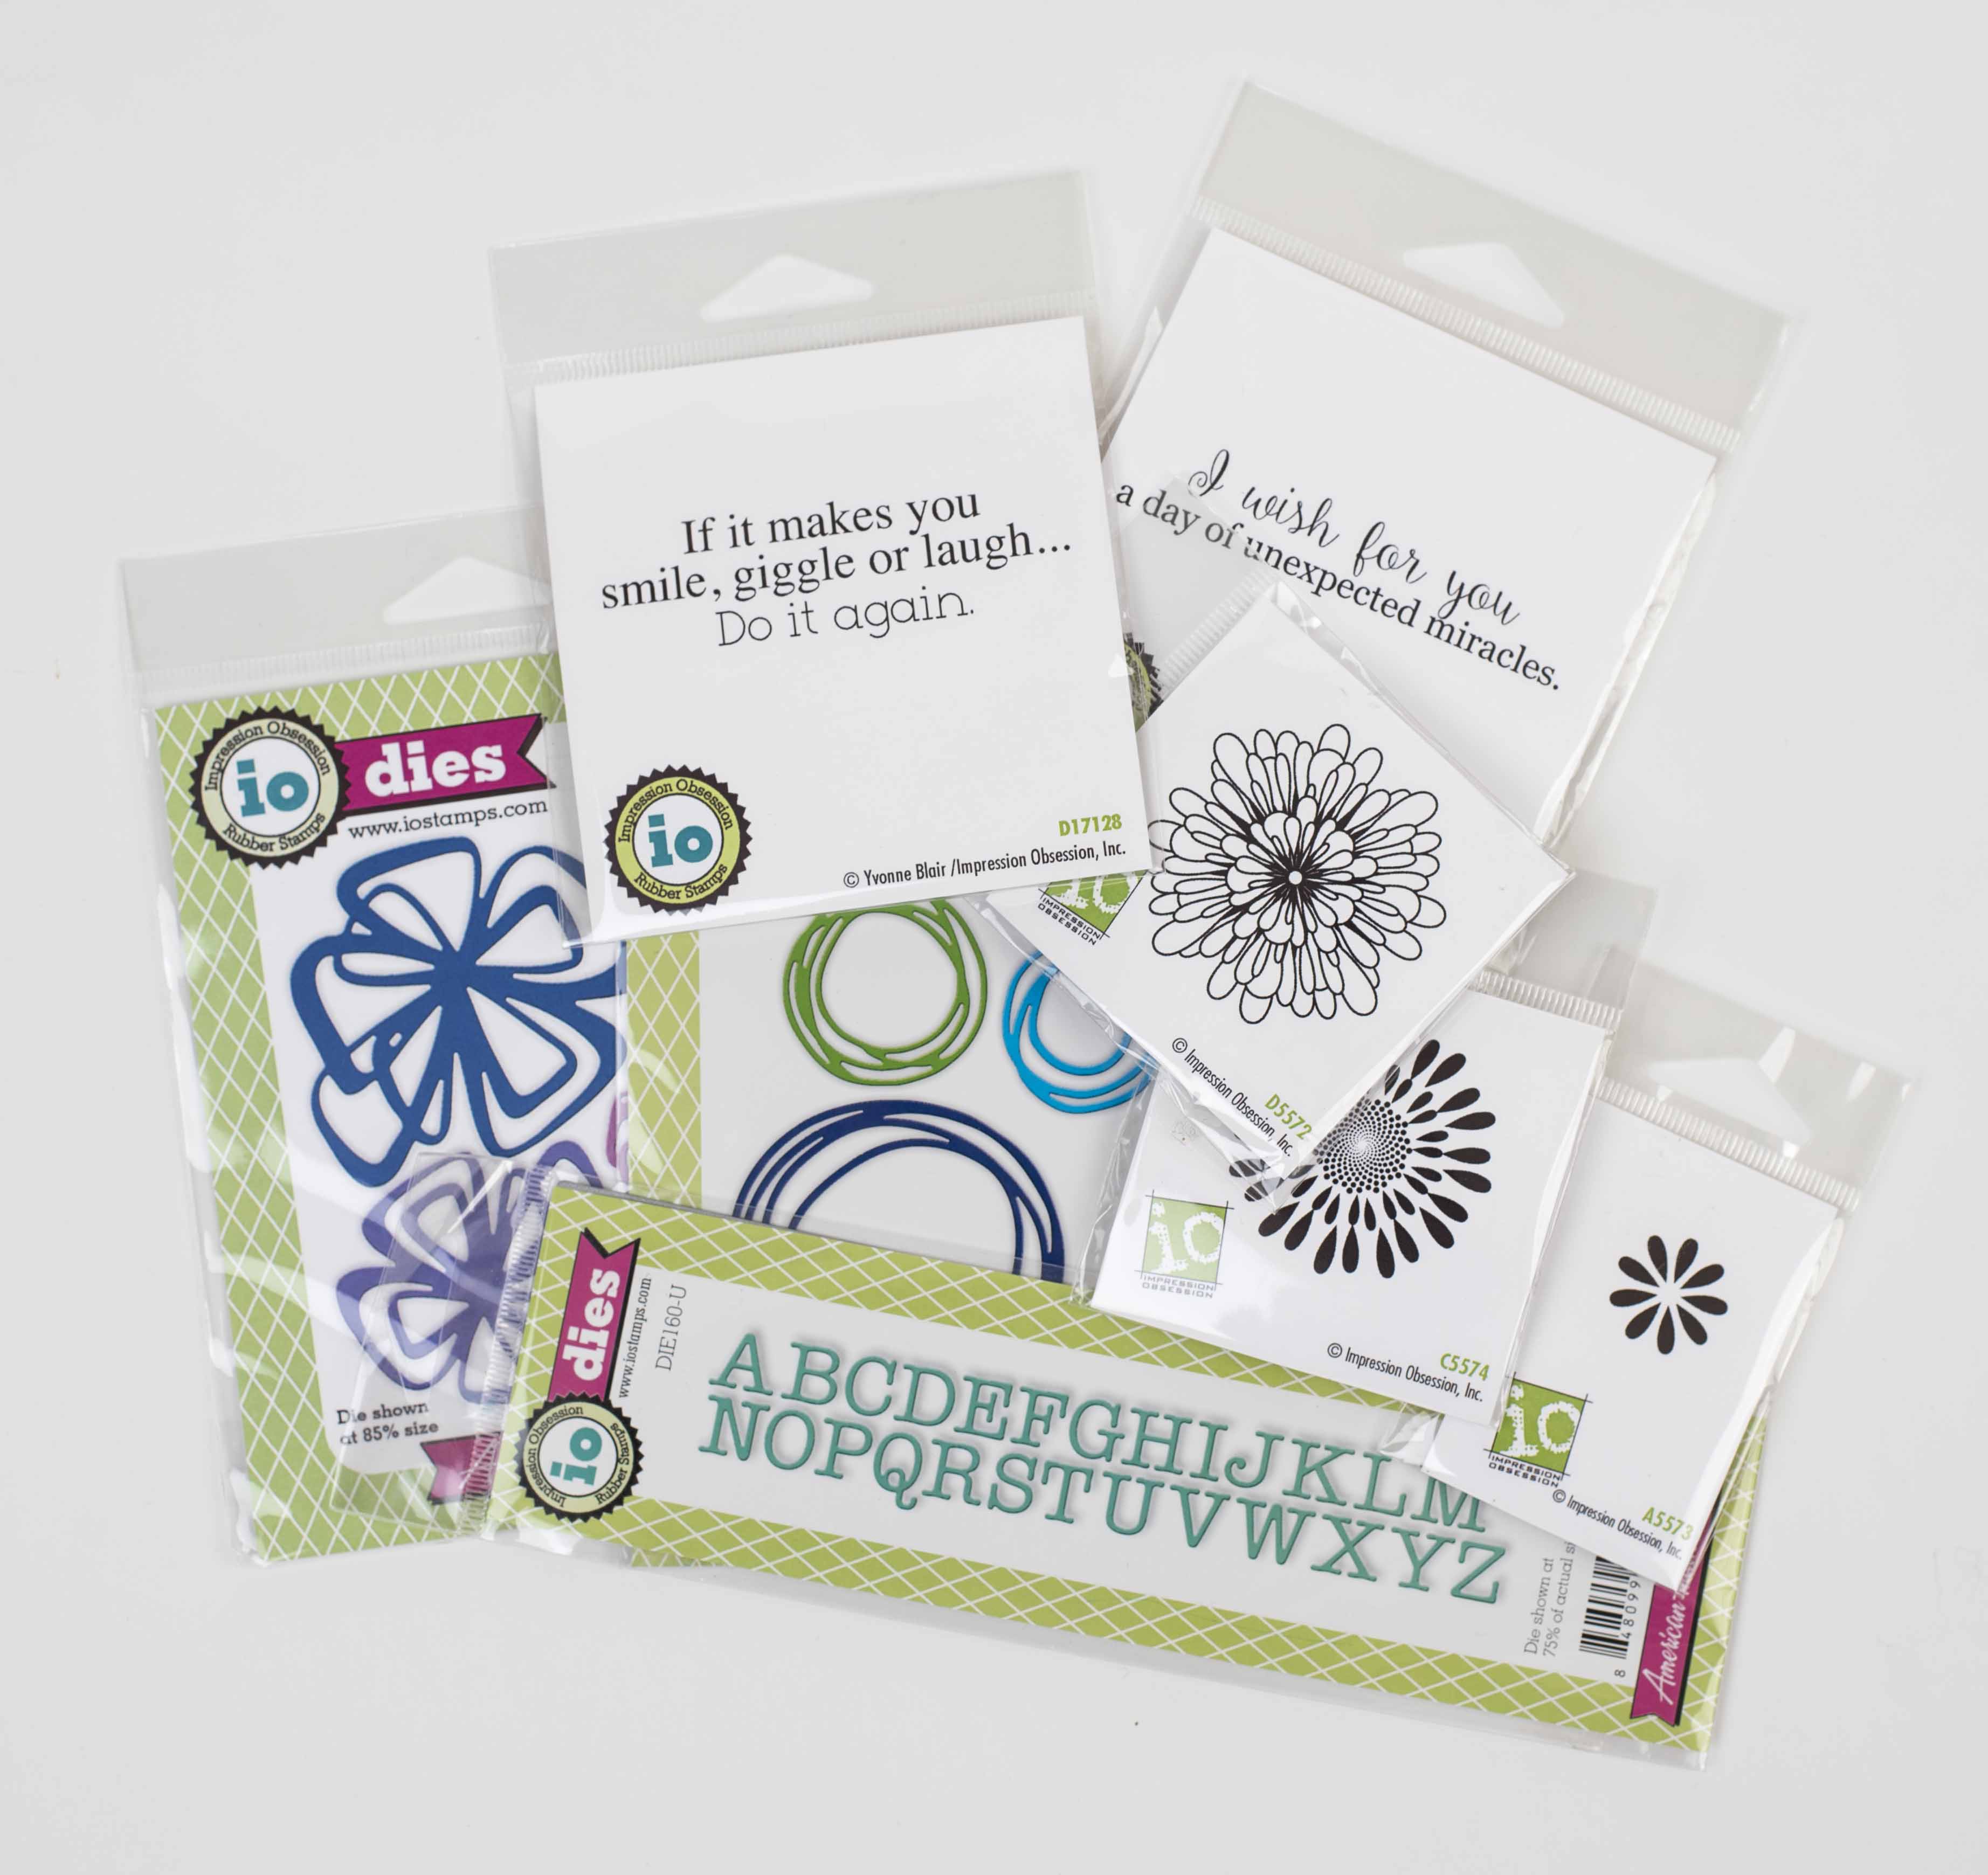 Impression Obsession stamps and die giveaway | Creative Scrapbooker Magazine